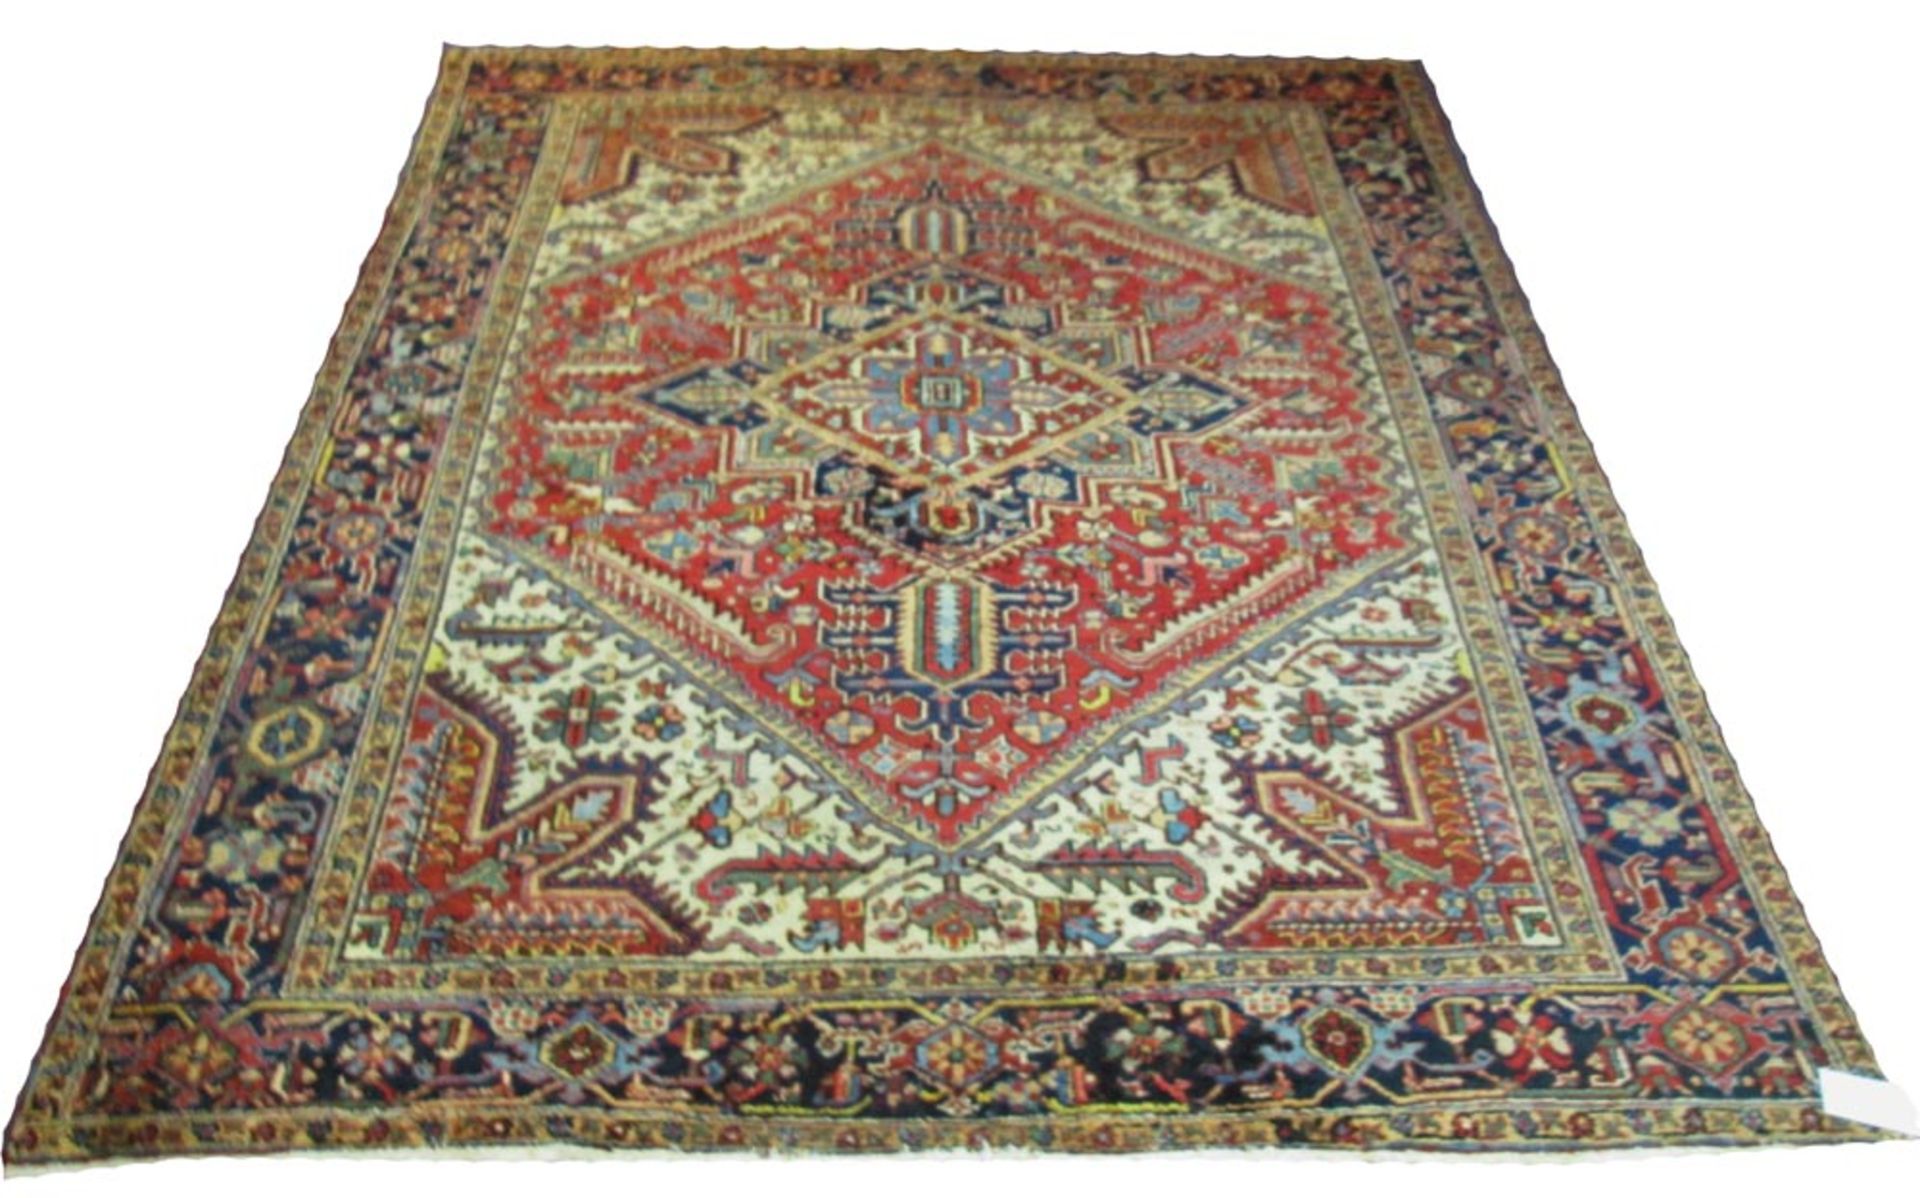 ANTIQUE HERIZ CARPET, 304cm x 250cm, medallion issuing palmettes on ruby field of vines and leaves.